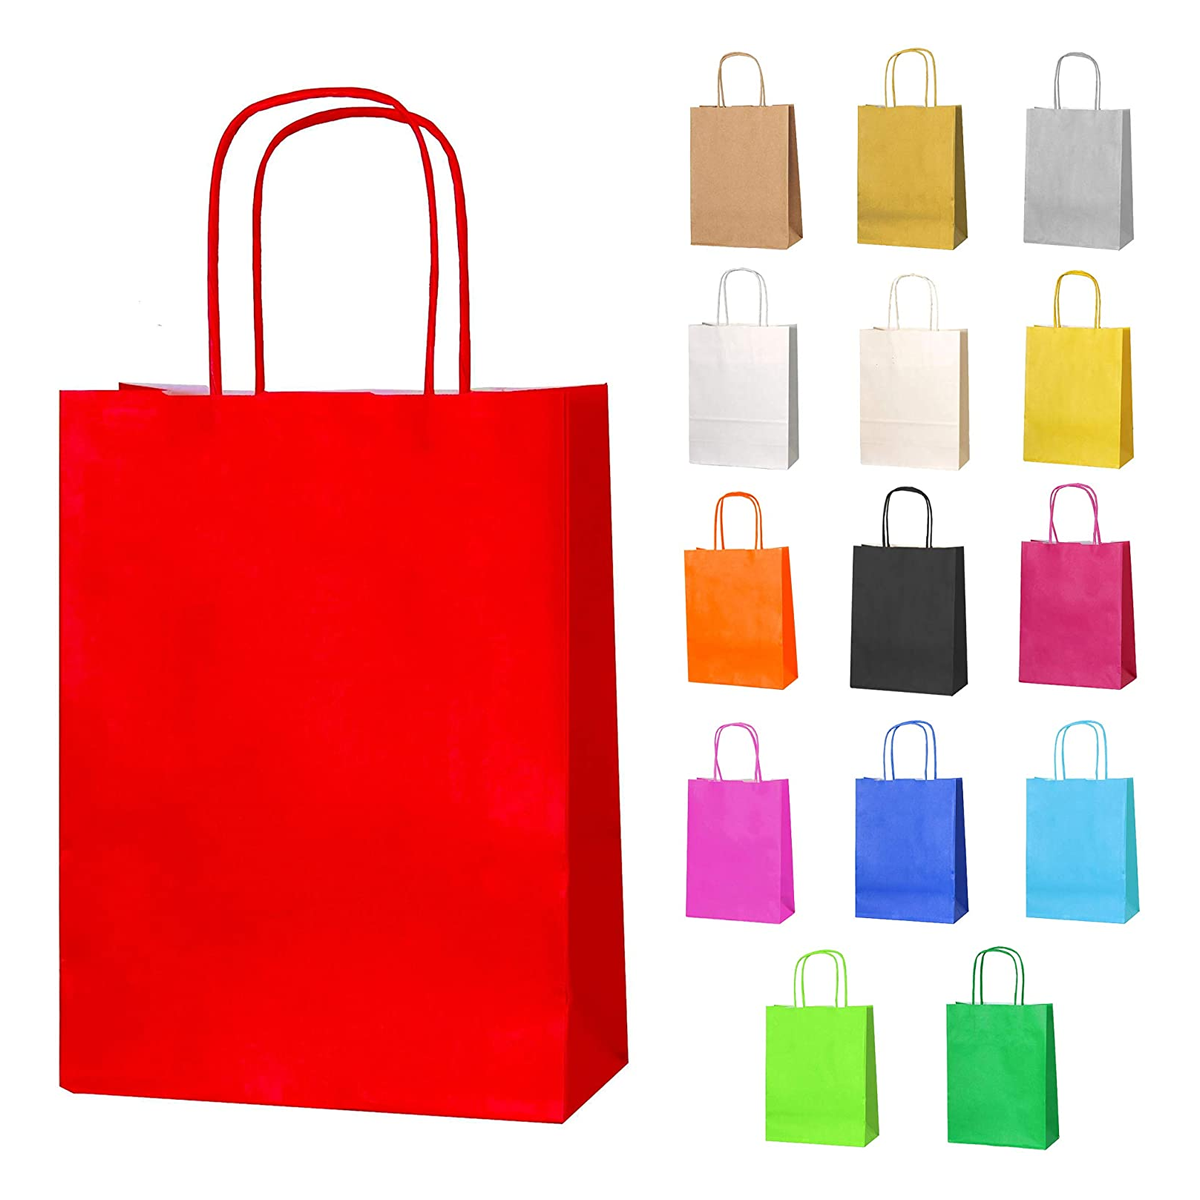 12pc Kraft Paper bags with twisted paper handle Size : 26x21x11cm Green - Willow